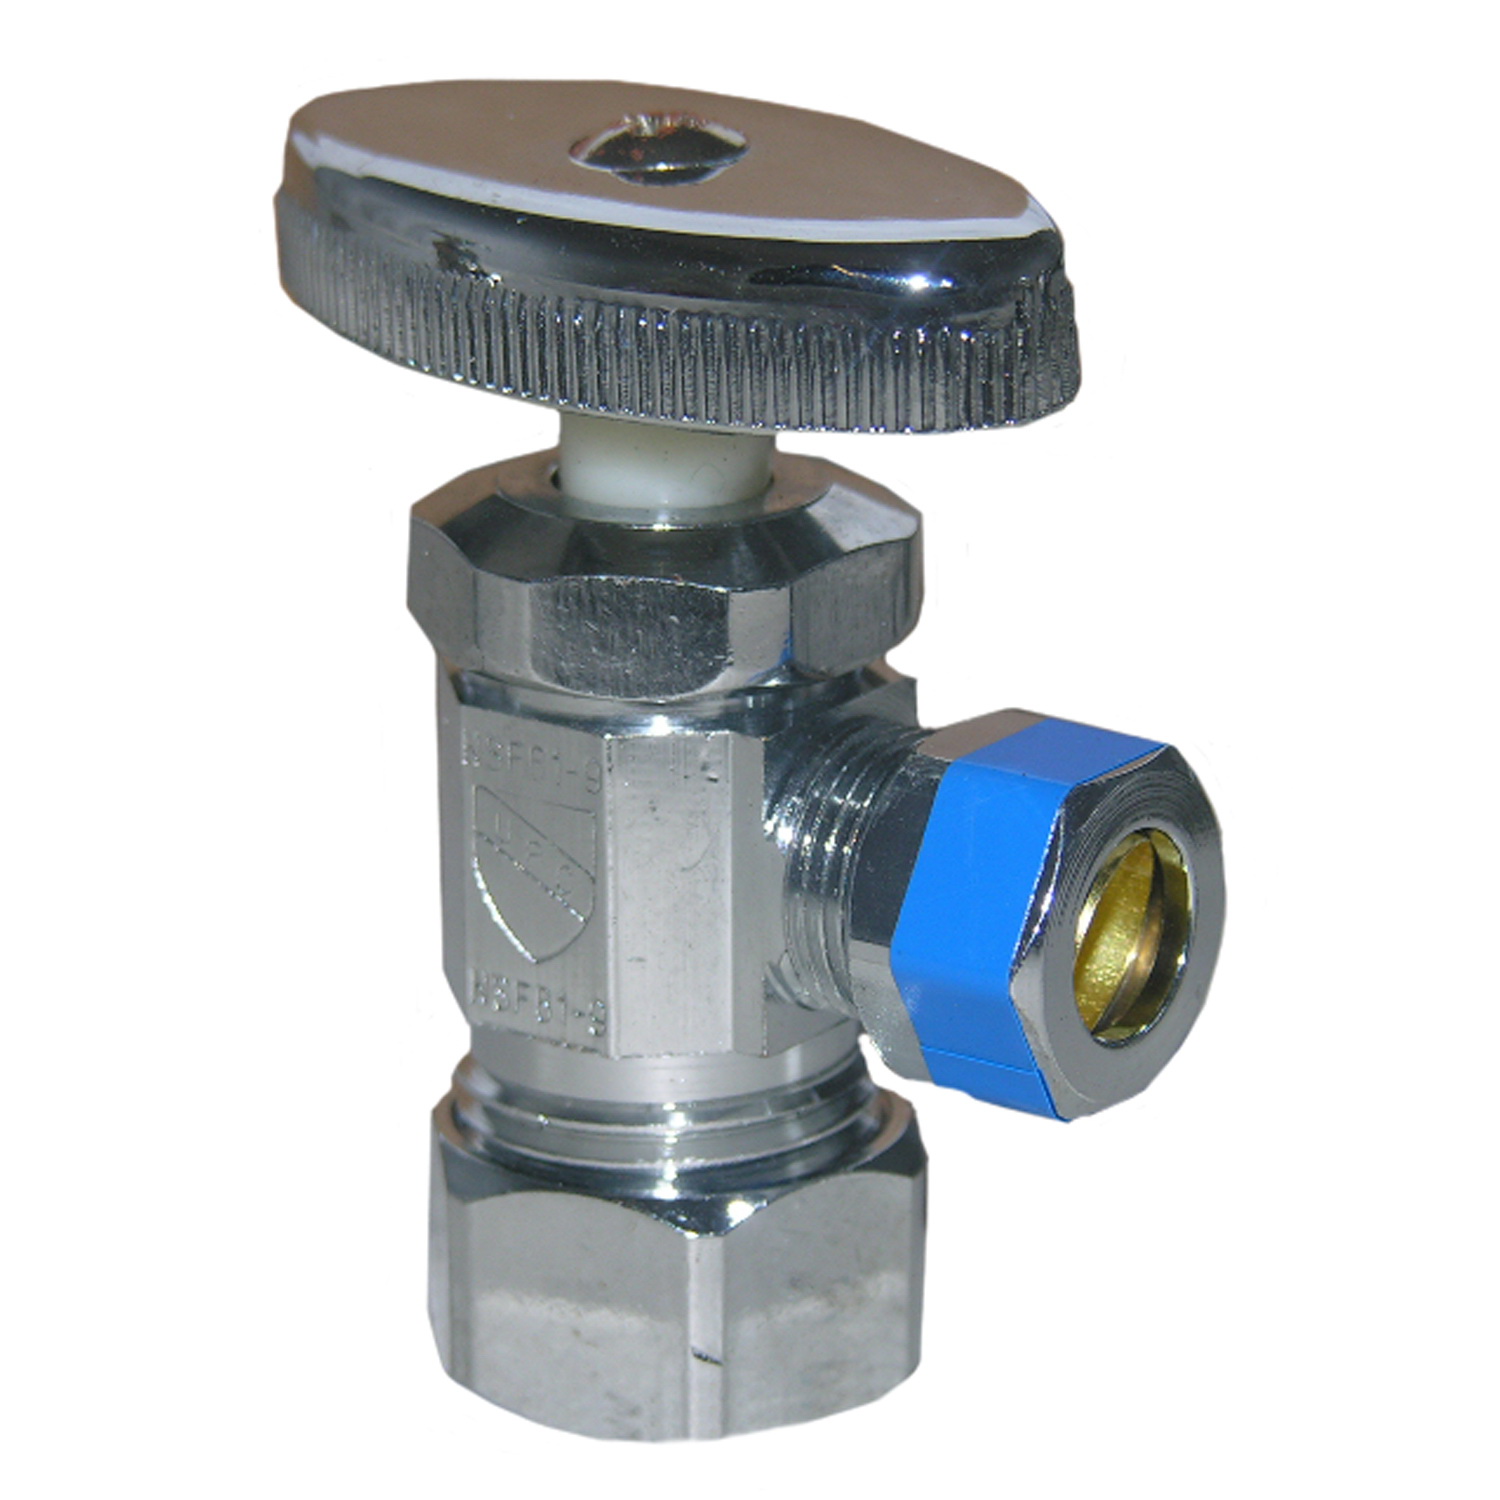 Lasco 06-7253 Standard-Duty Angle Stop Valve, 5/8 x 3/8 in Connection, Compression x Compression, Brass Body